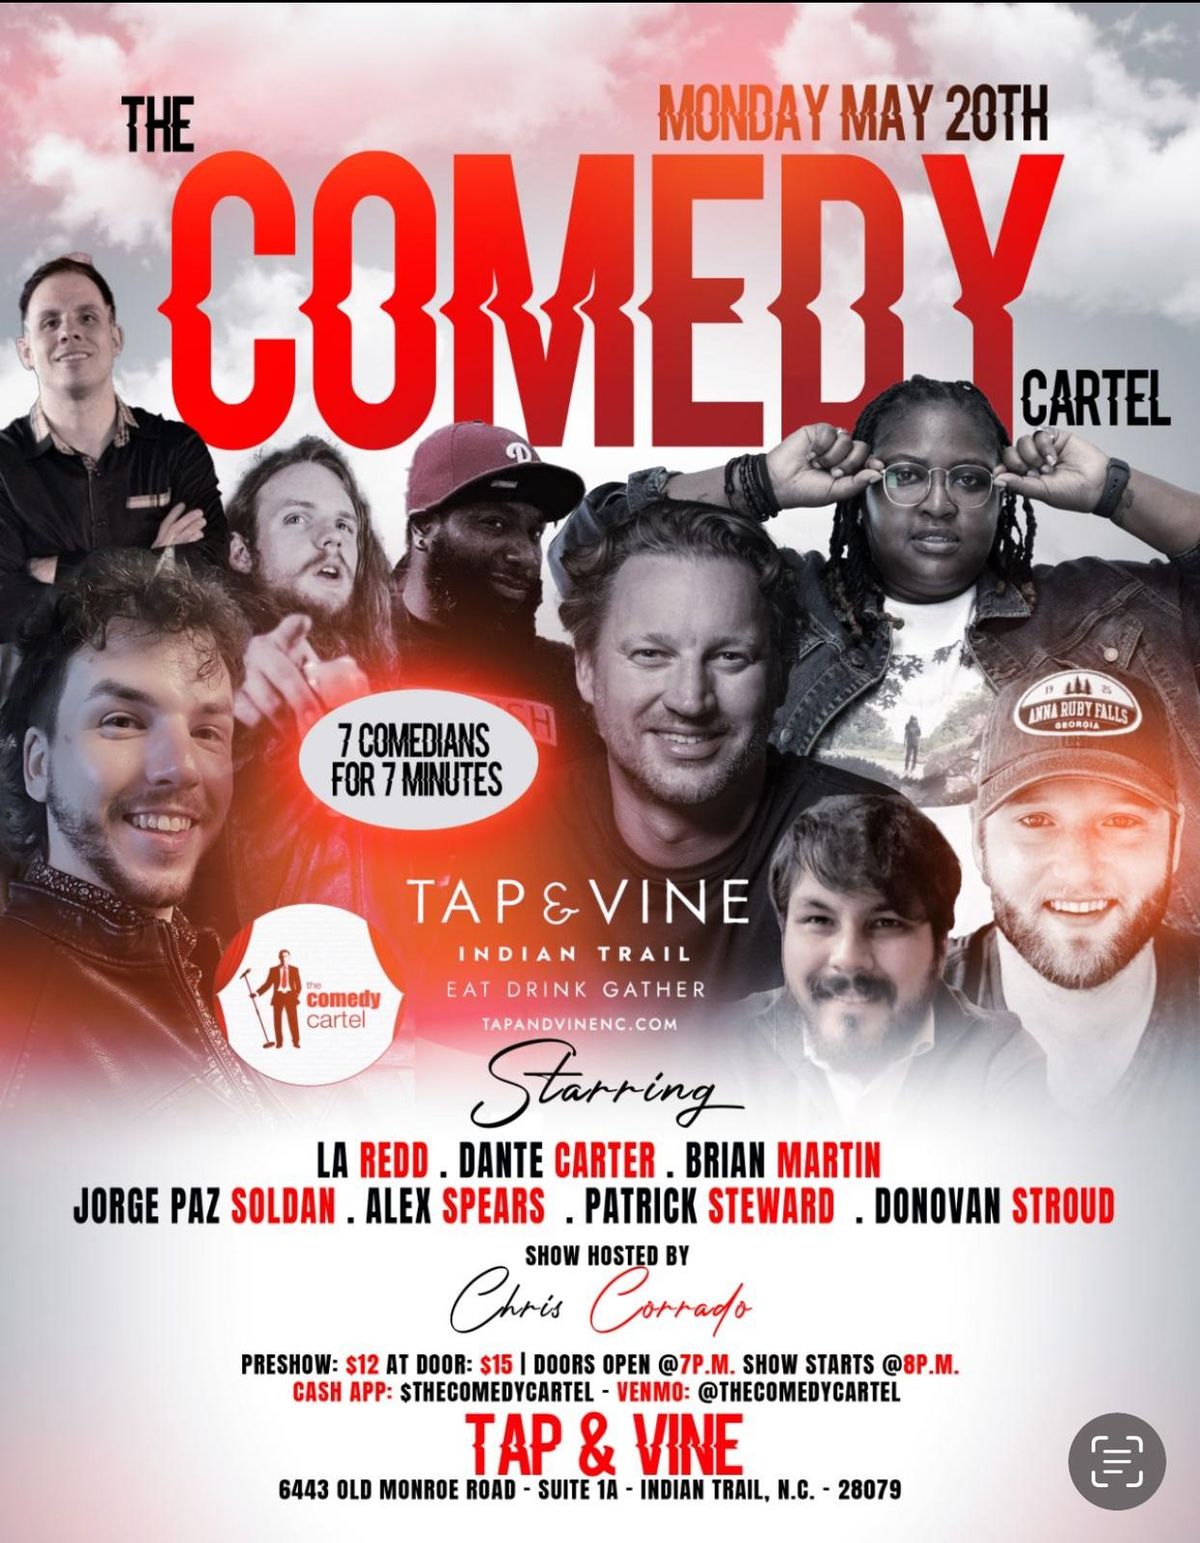 Monday Night Comedy featuring The Comedy Cartel